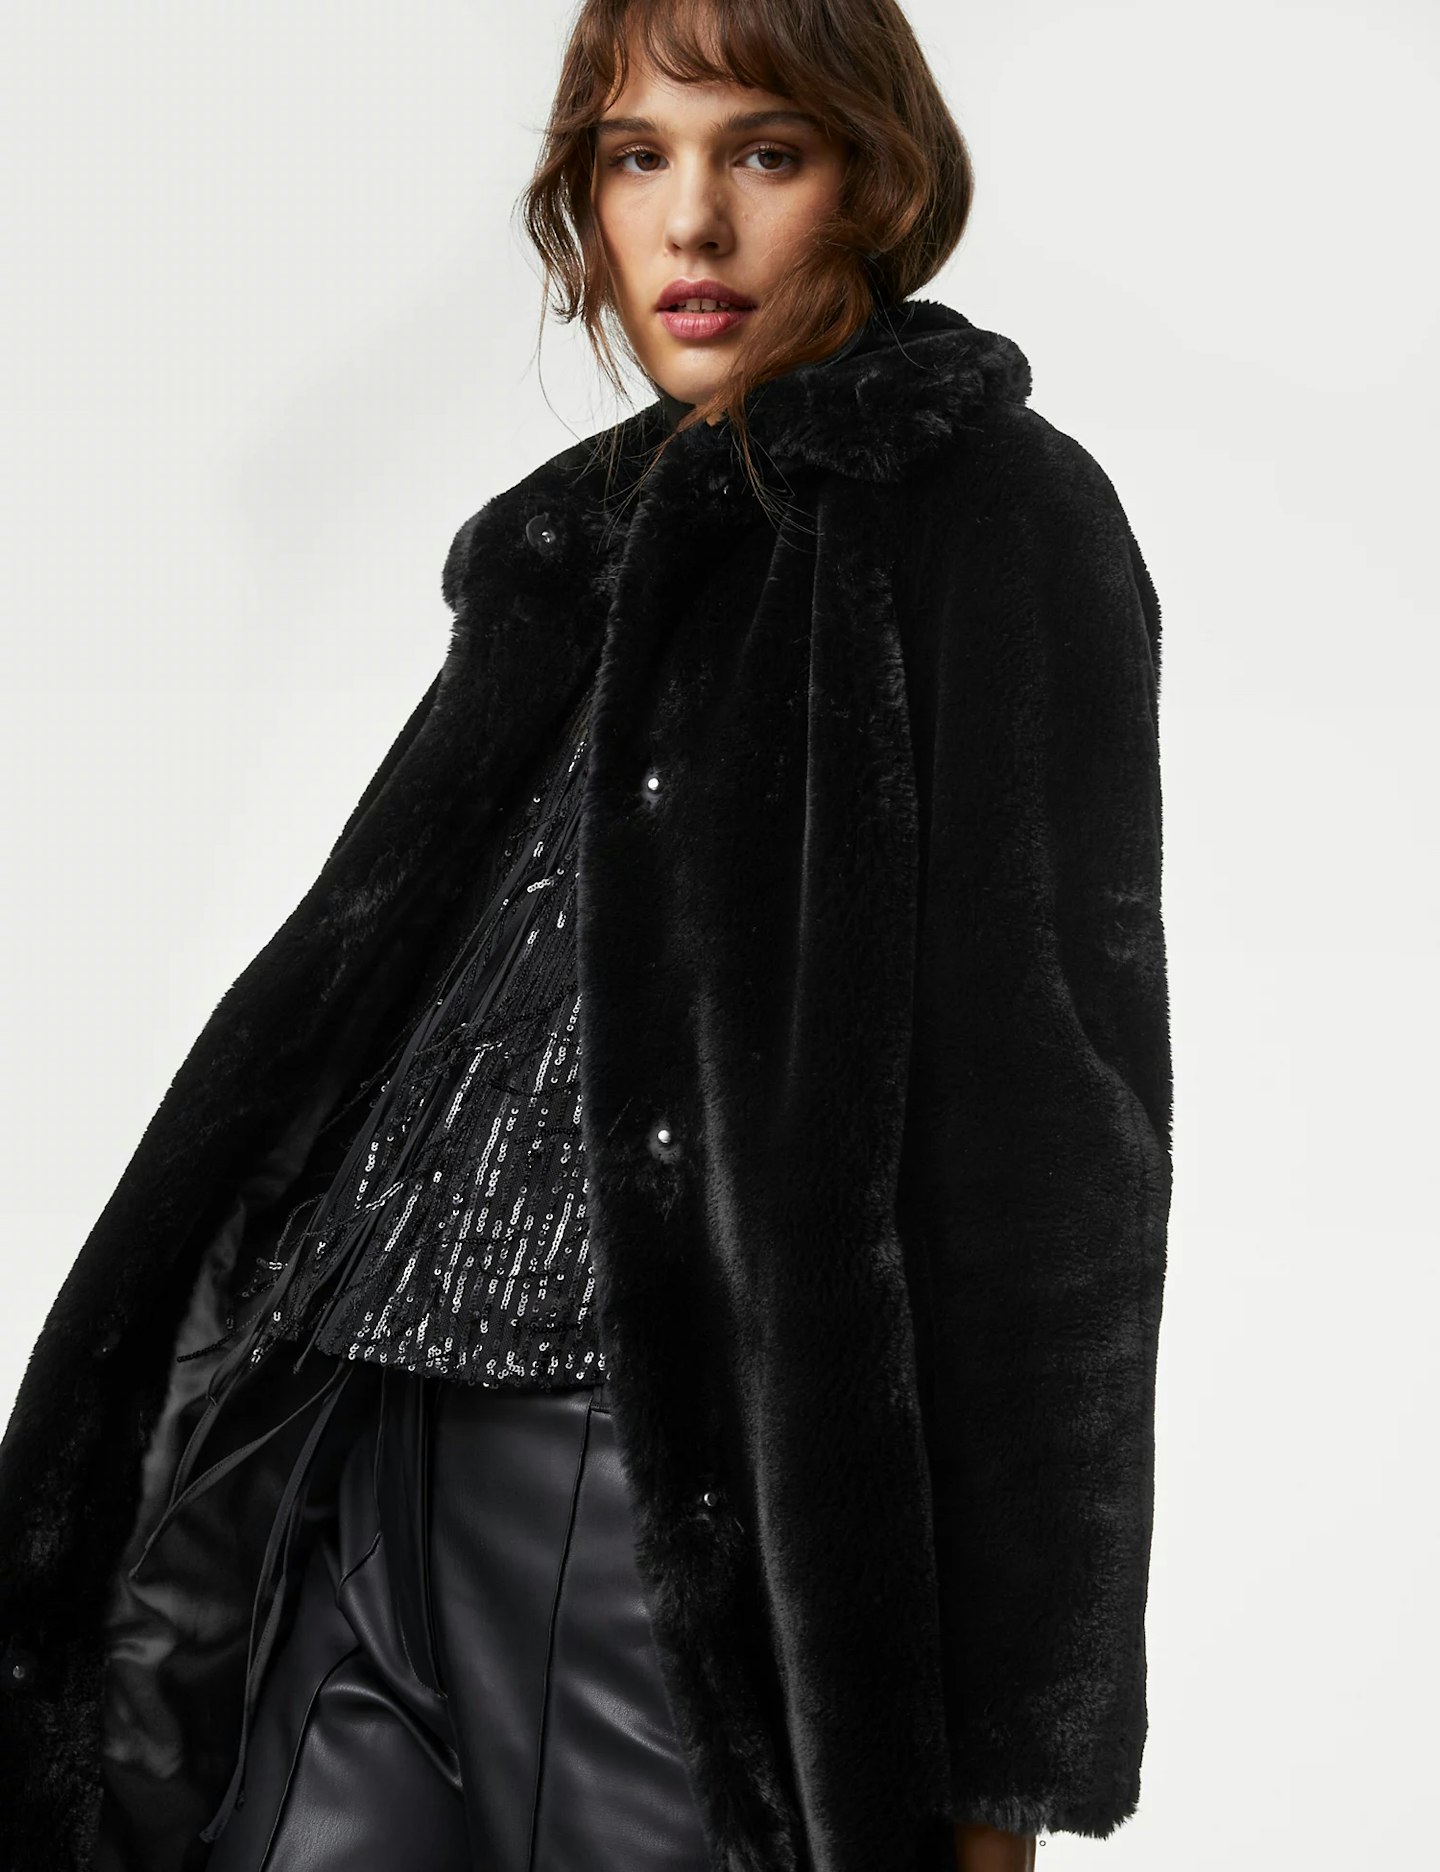 Marks and spencer faux fur jacket